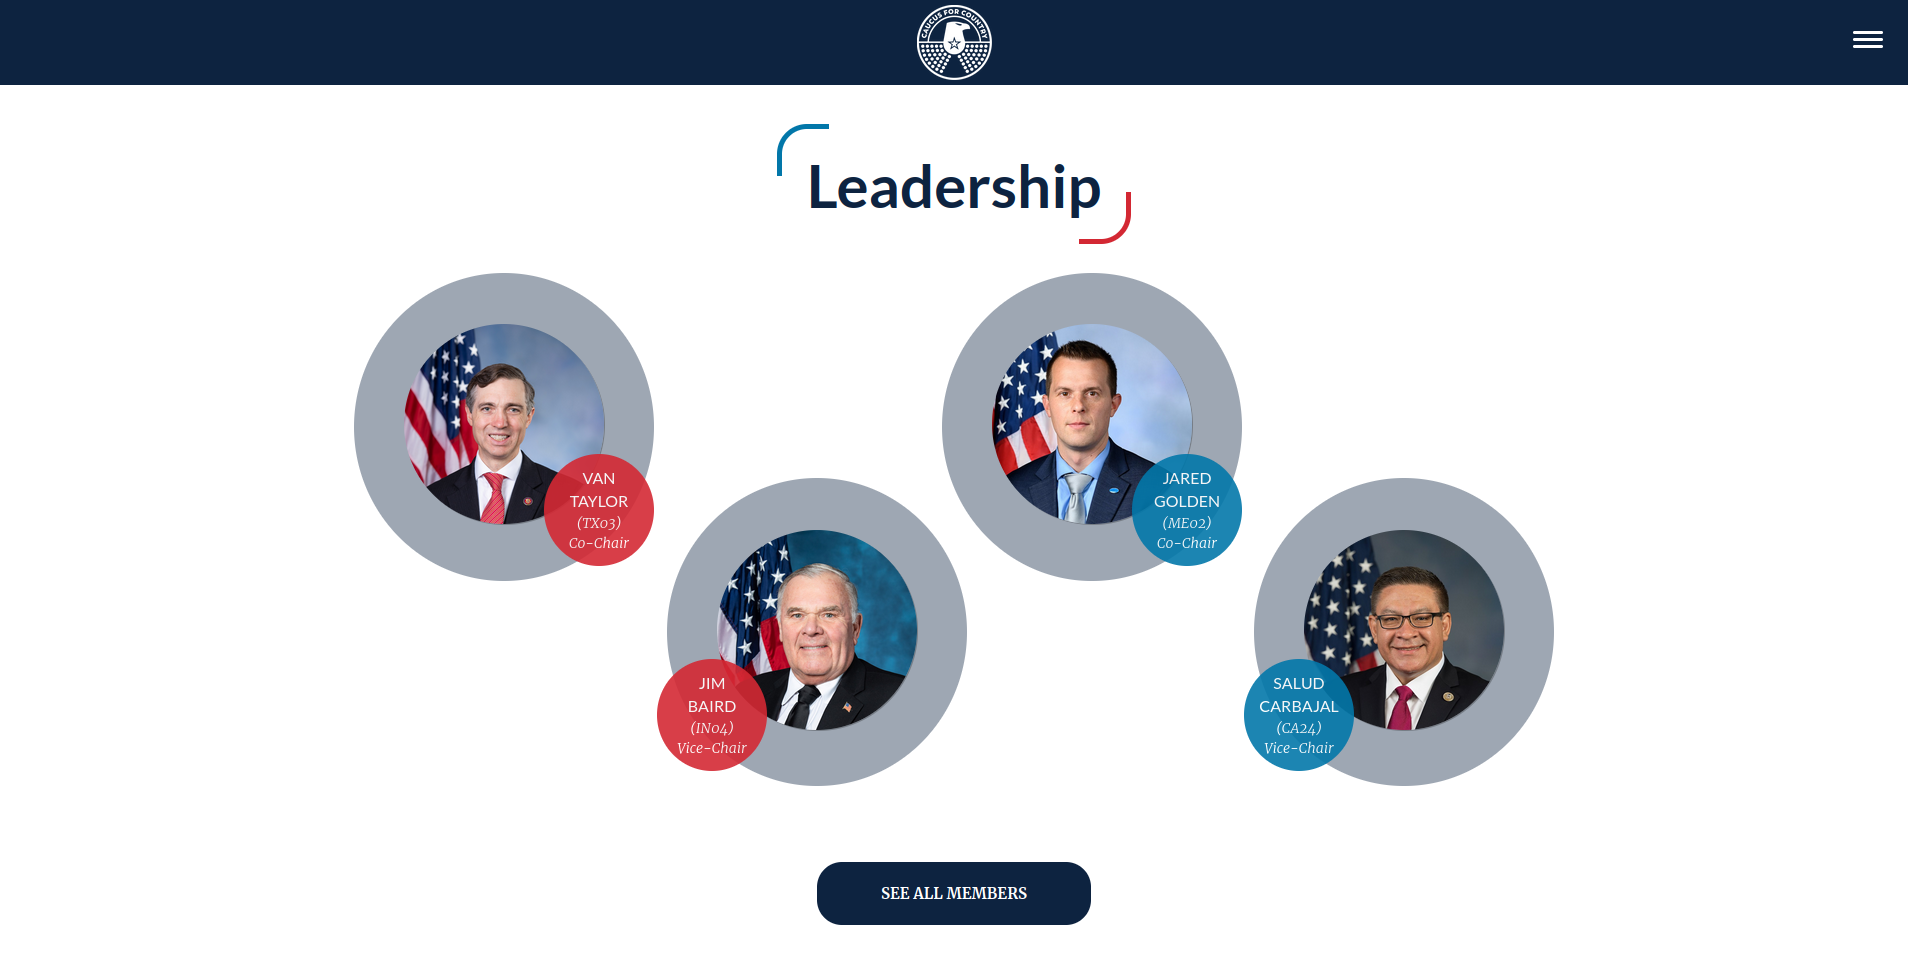 For Country Caucus page Leadership section. Shows 4 caucus chair images in circles.